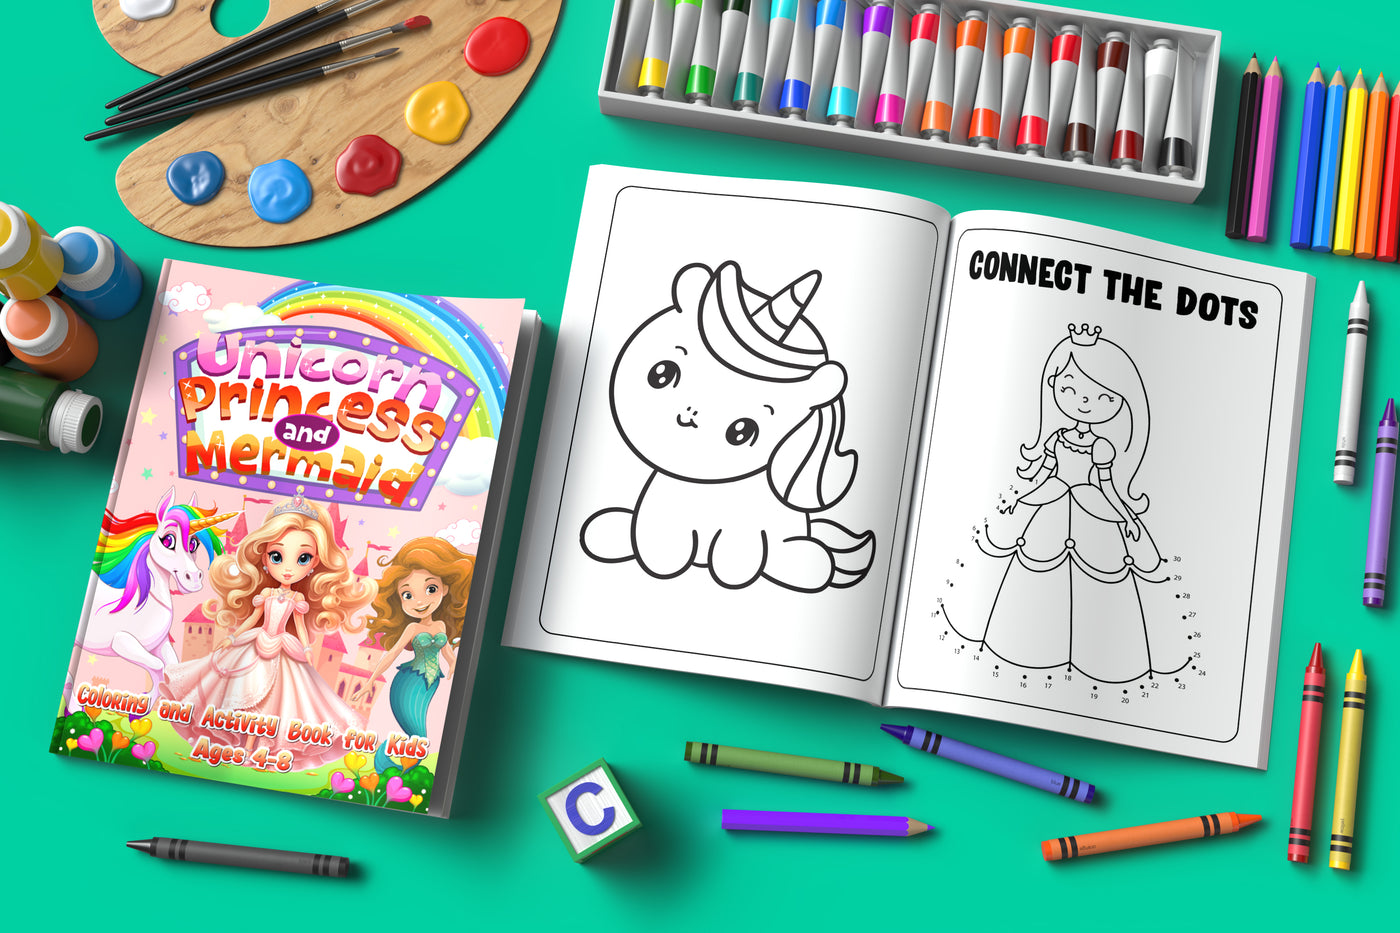 Unicorn Coloring Book For Kids Ages 4-8: Rainbow, Mermaid Coloring